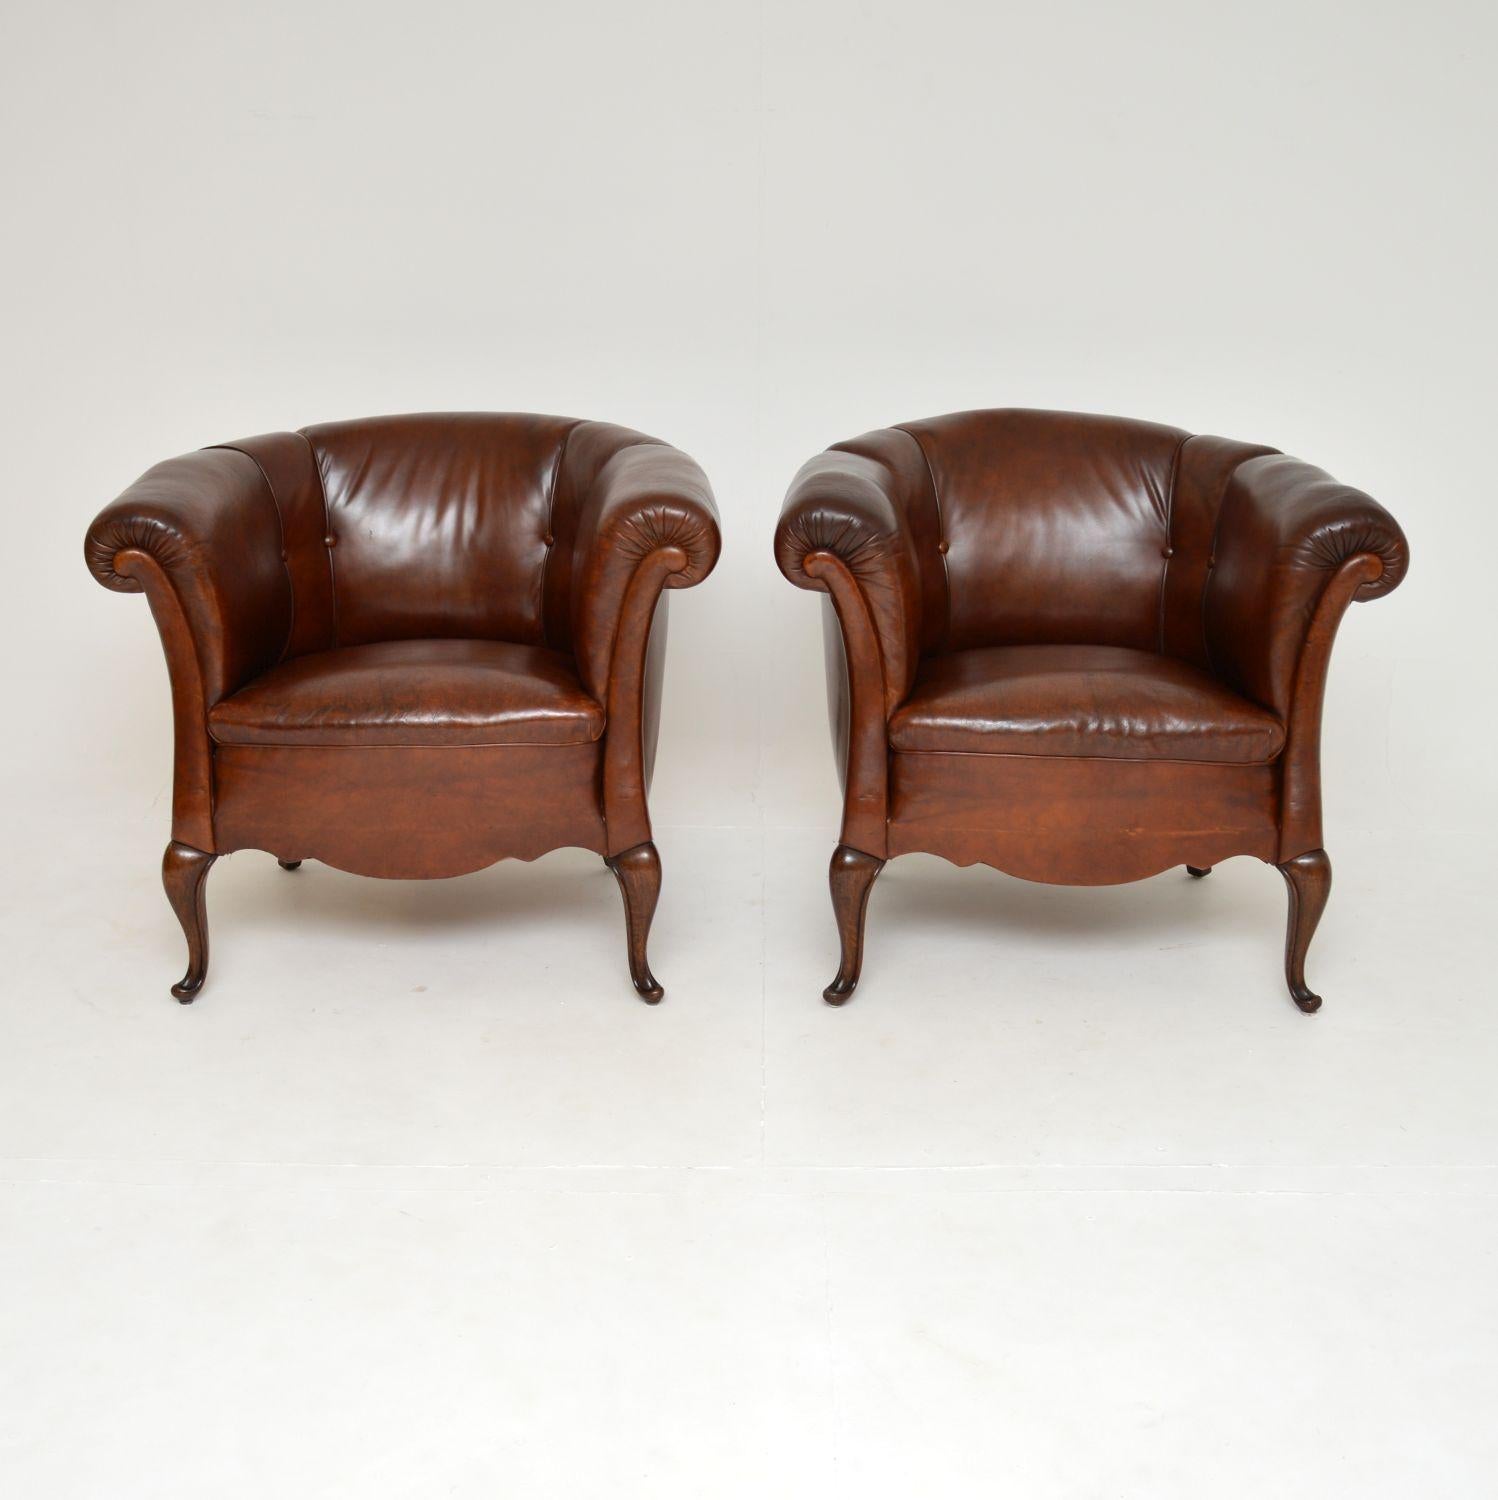 A stunning pair of antique Swedish leather armchairs. They were recently imported from Sweden, and they date from around the 1890’s period.

They quality is exceptional, they are very well built, extremely comfortable & a generous size. The frames